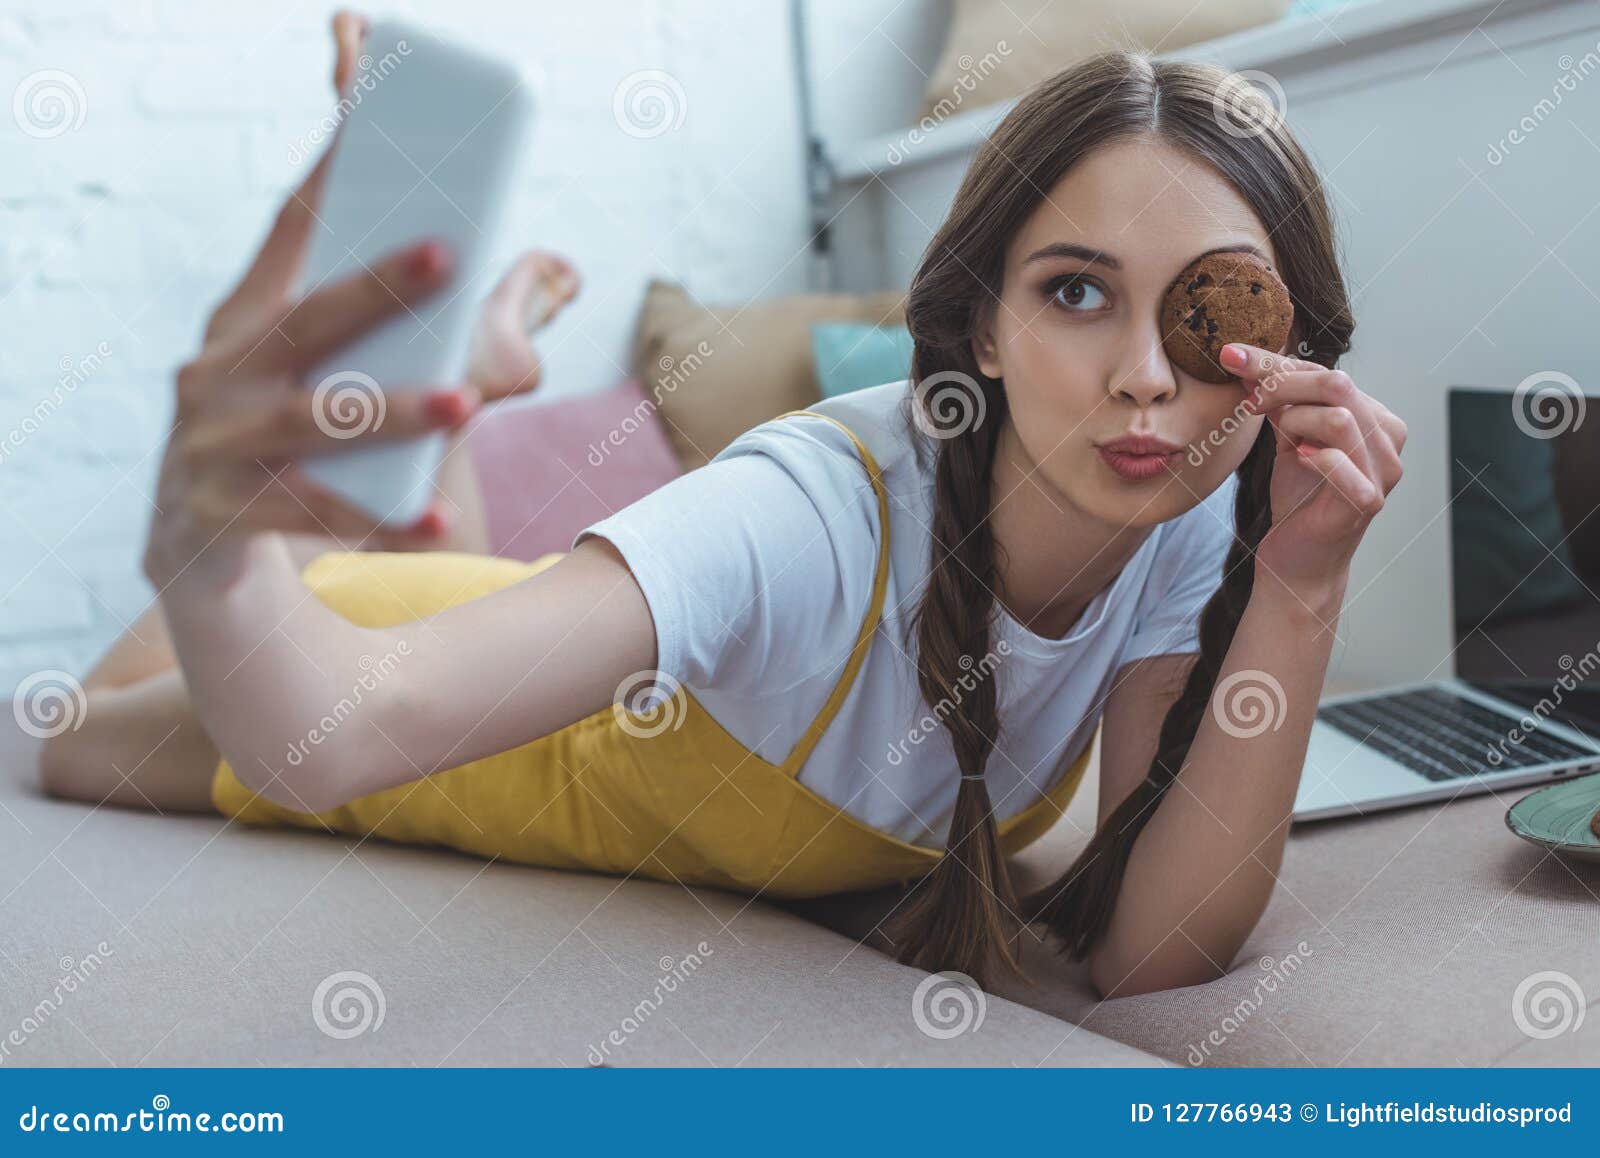 Beautiful Girl With Cookie Taking Selfie On Smartphone While Lying On 